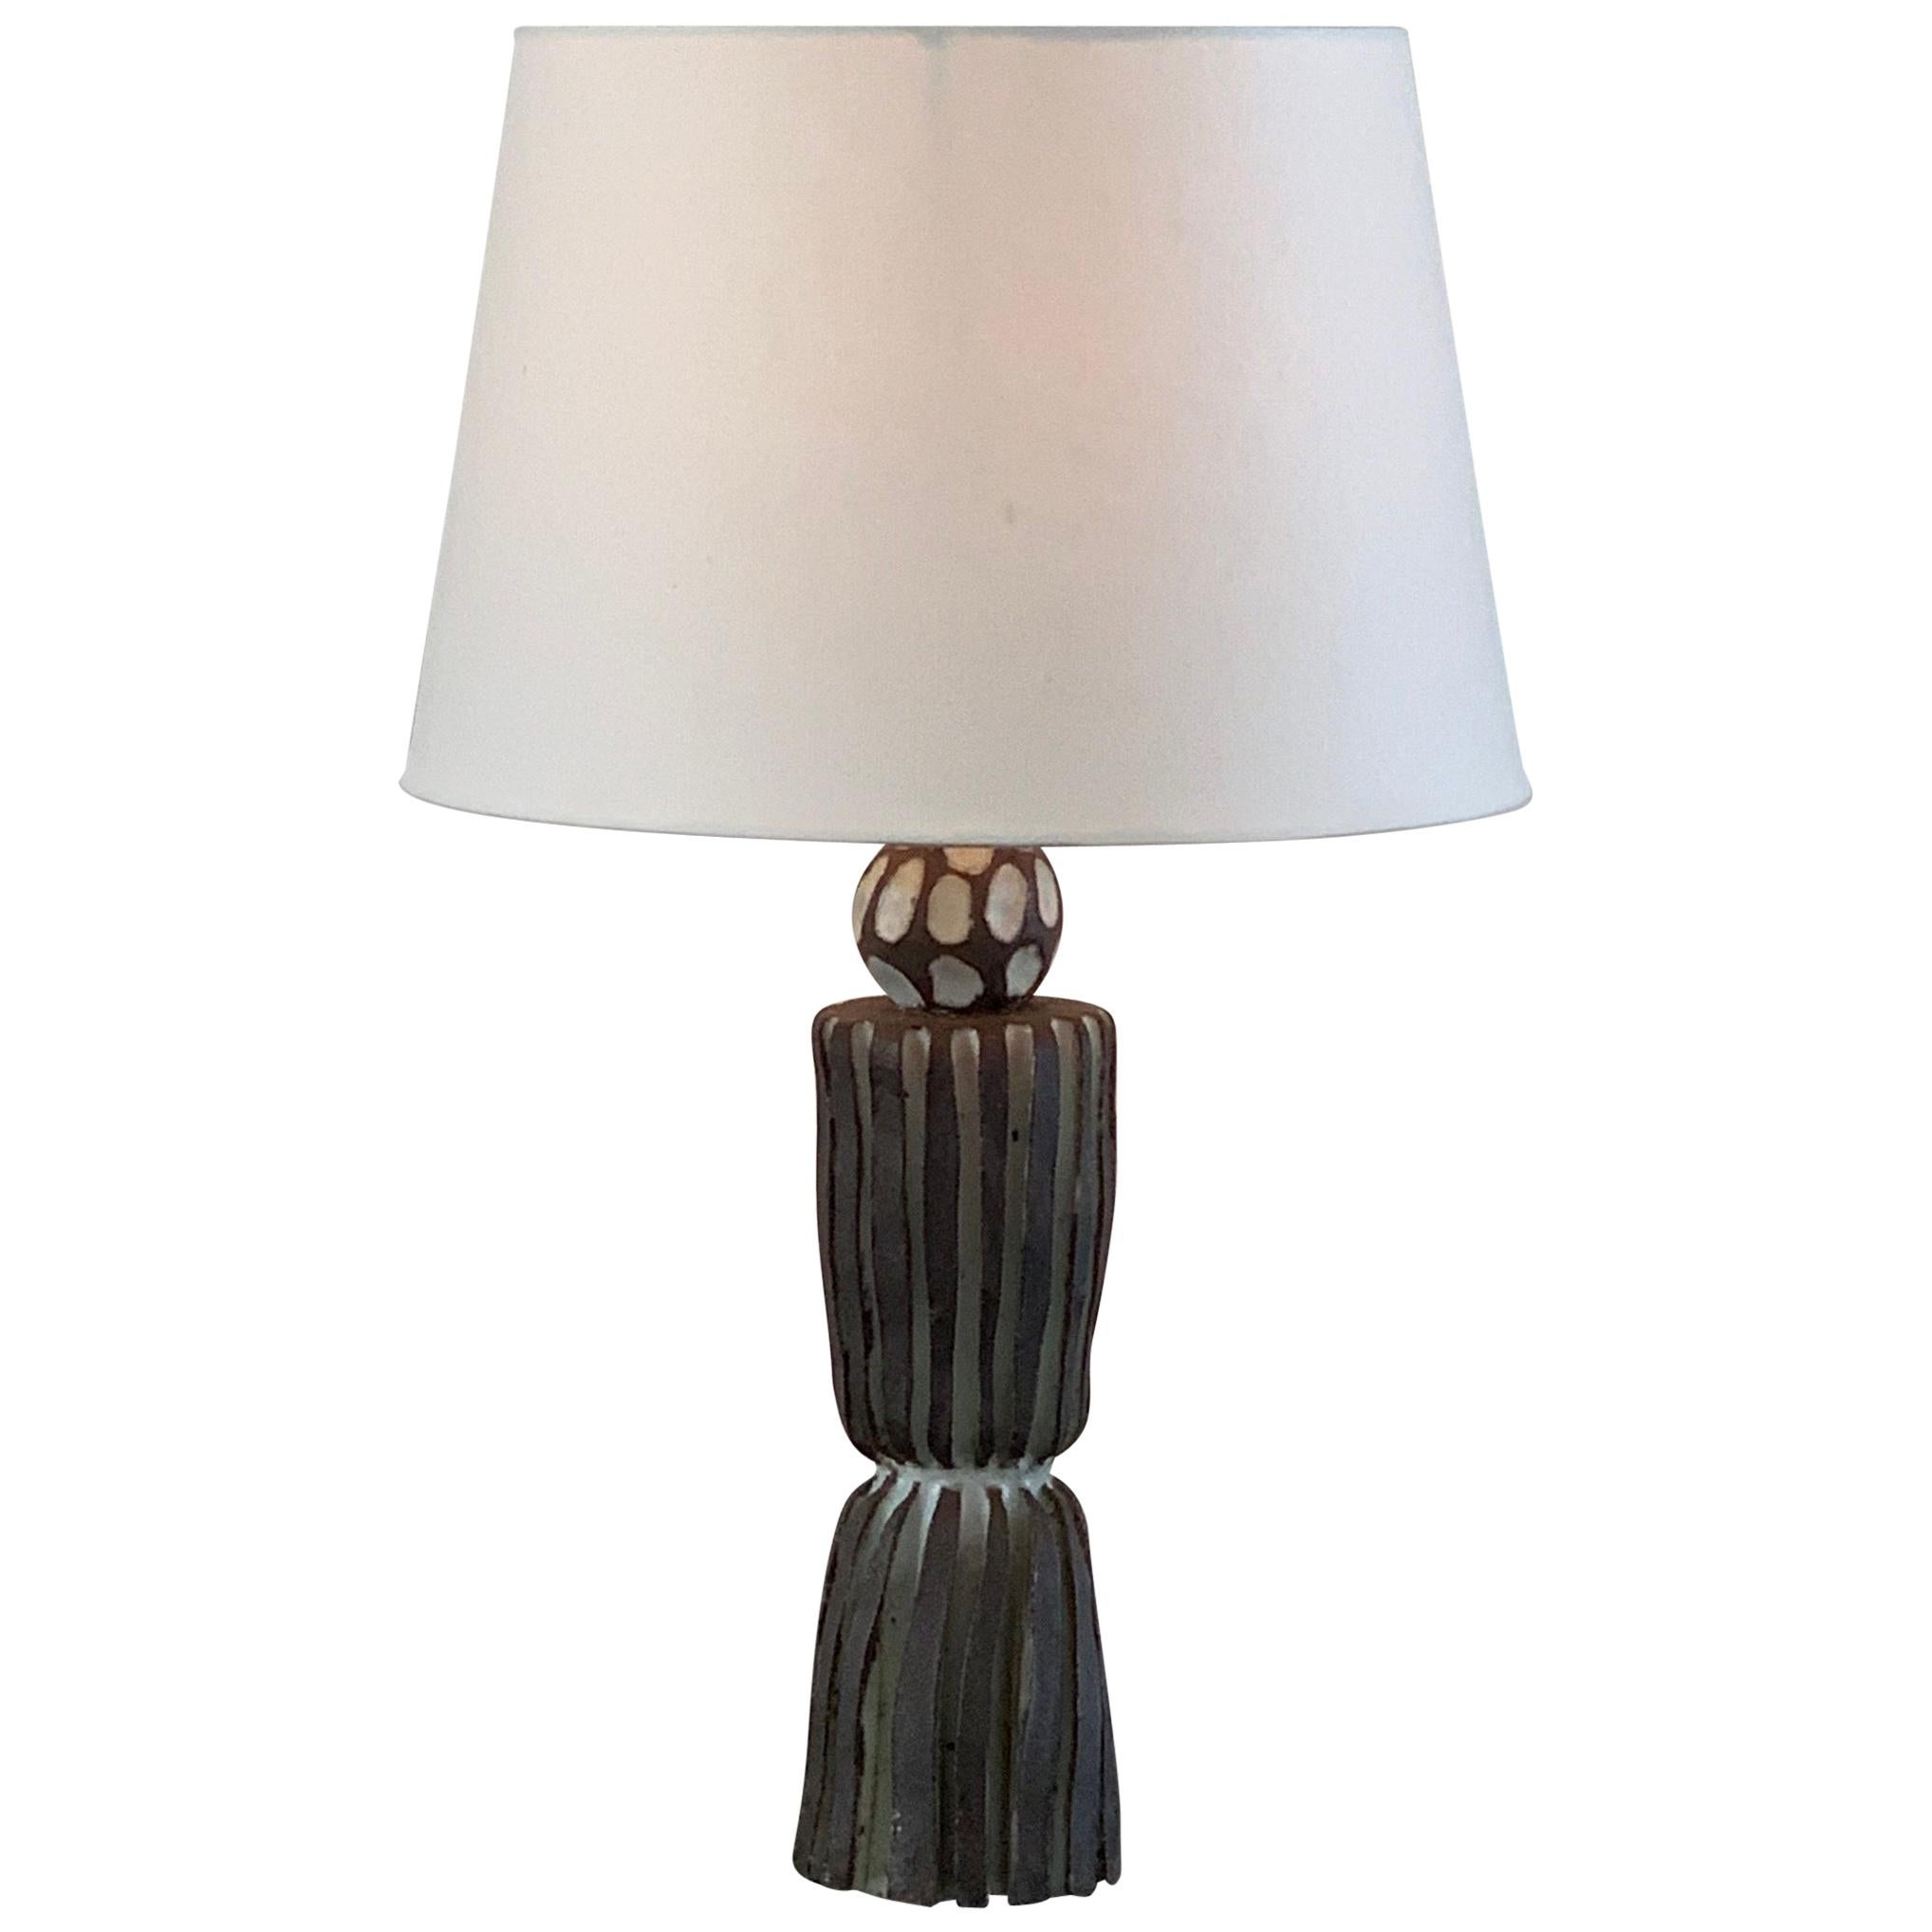 Grooved 'Sillons' Pottery Lamp with Parchment Shade by Design Frères For Sale